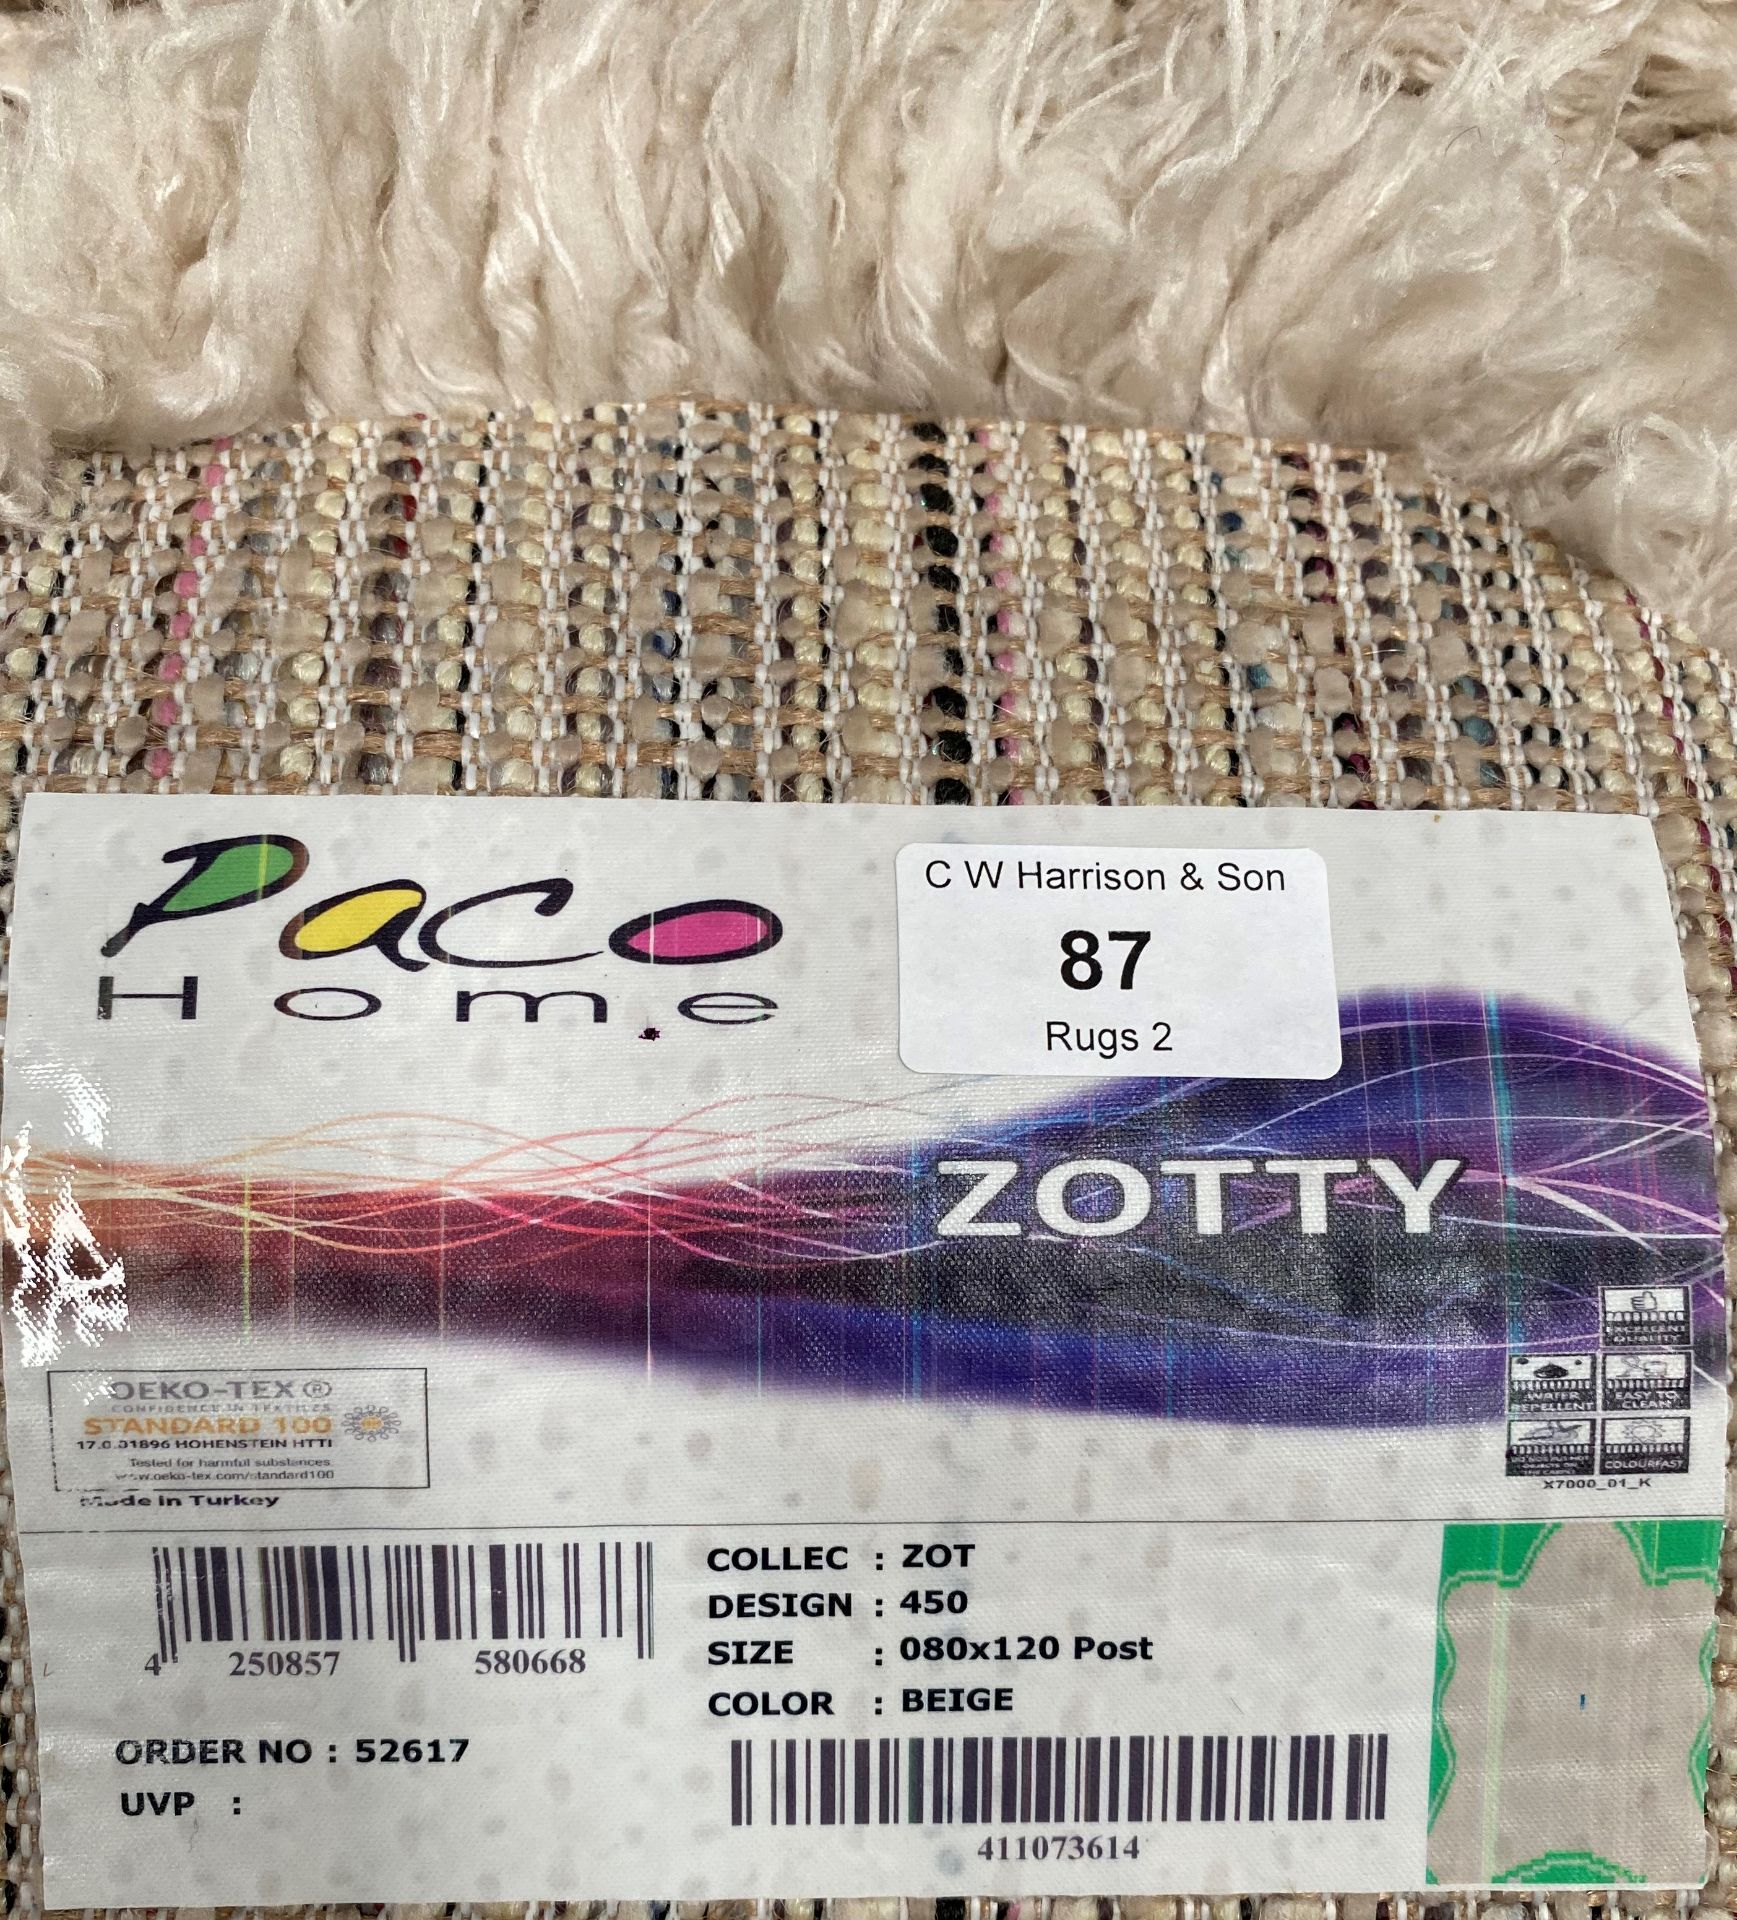 A Paco Home Zotty ZOT450 beige rug - 80c - Image 2 of 3